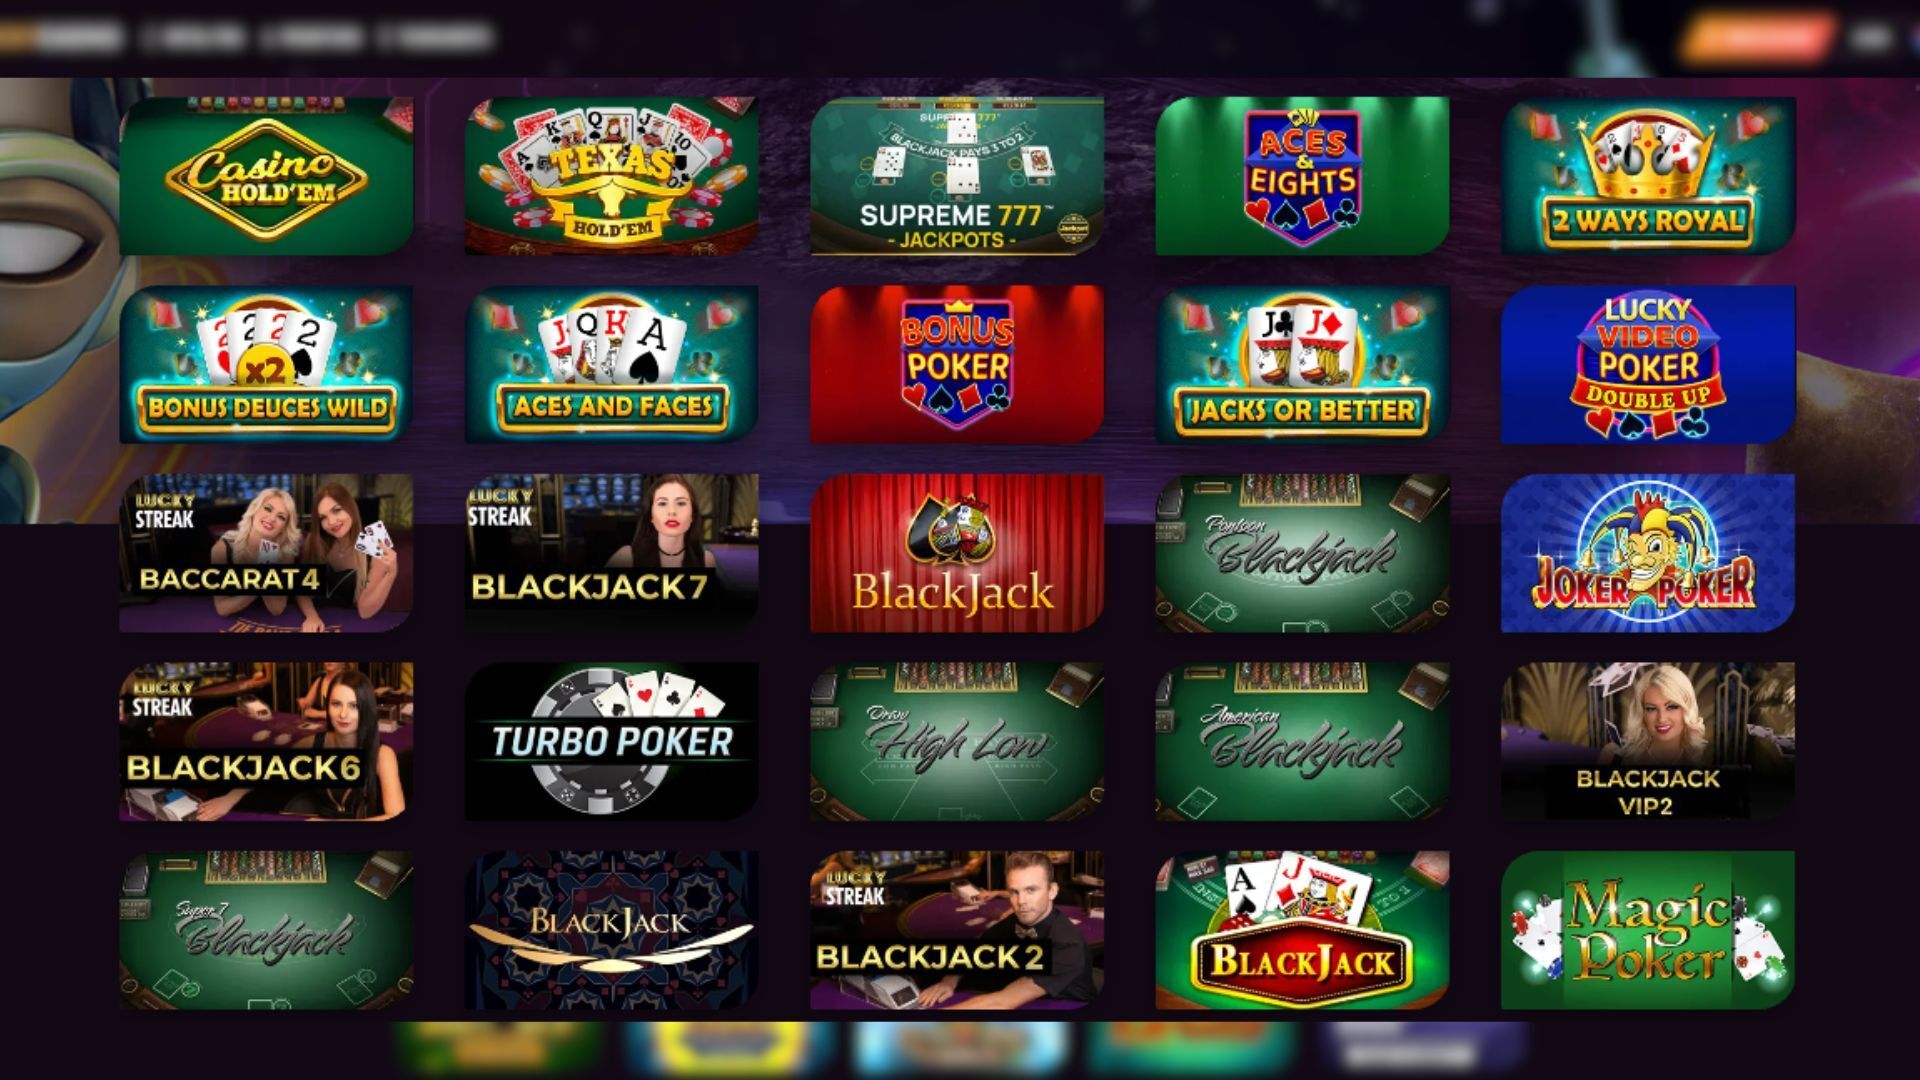 This is a screenshot of the Table Games at Ricky Casino in Australia